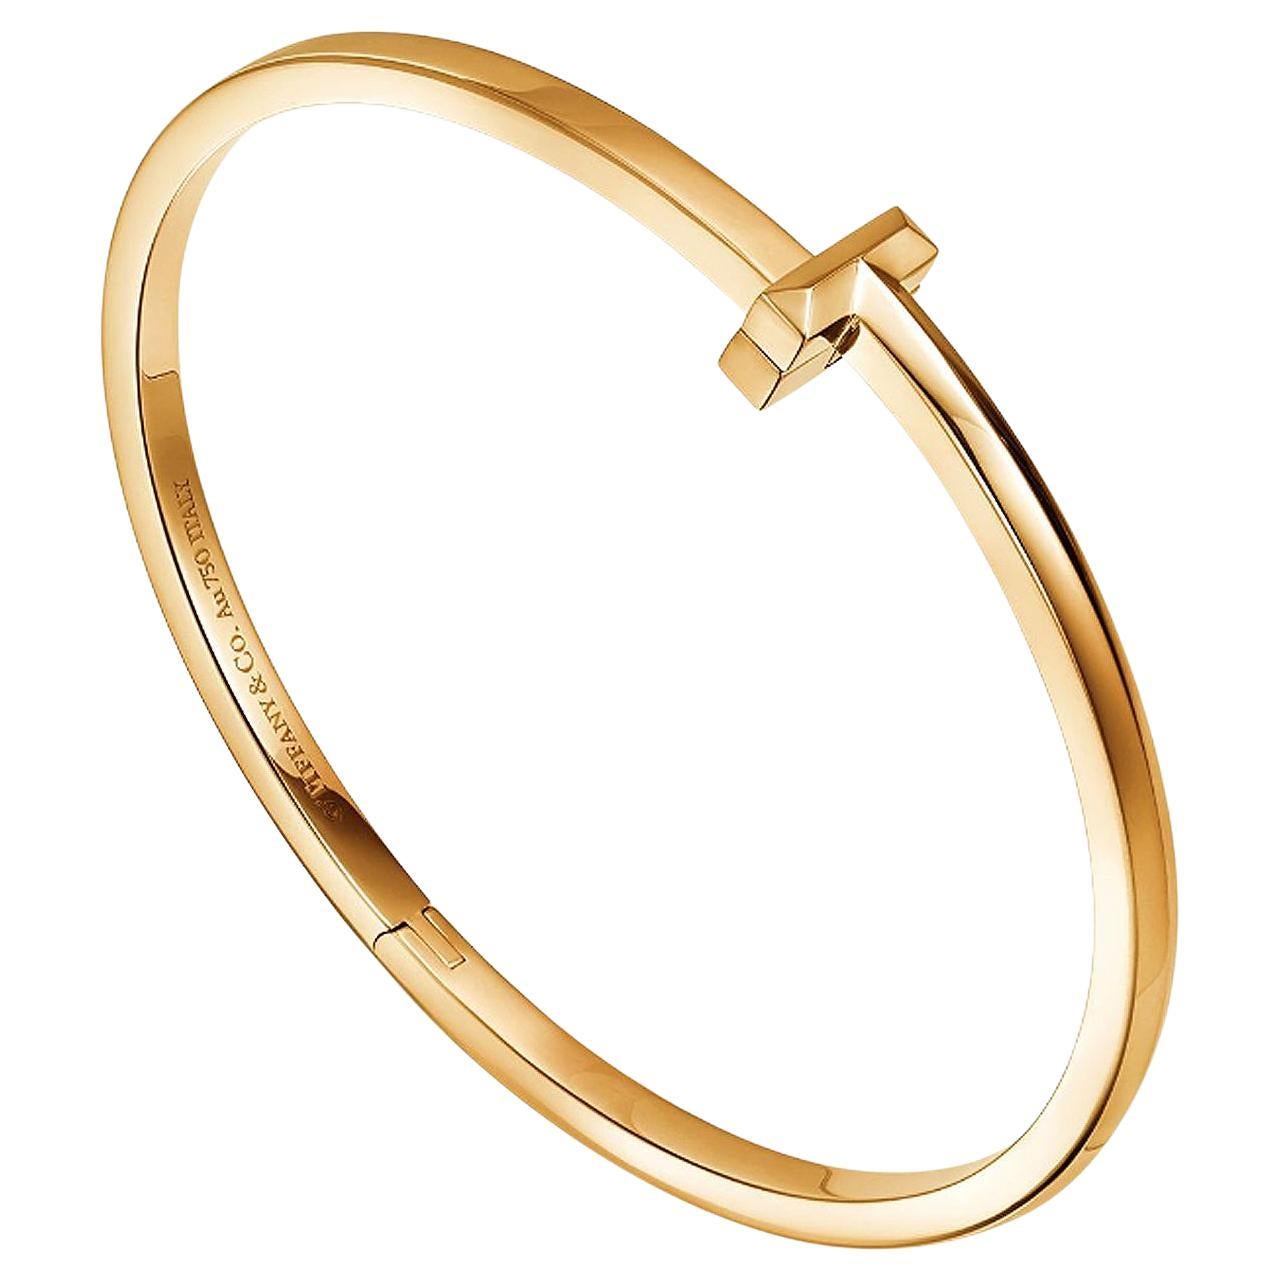 Tiffany & Co T T1 Narrow Hinged Bangle in 18k Gold Medium Size For Sale